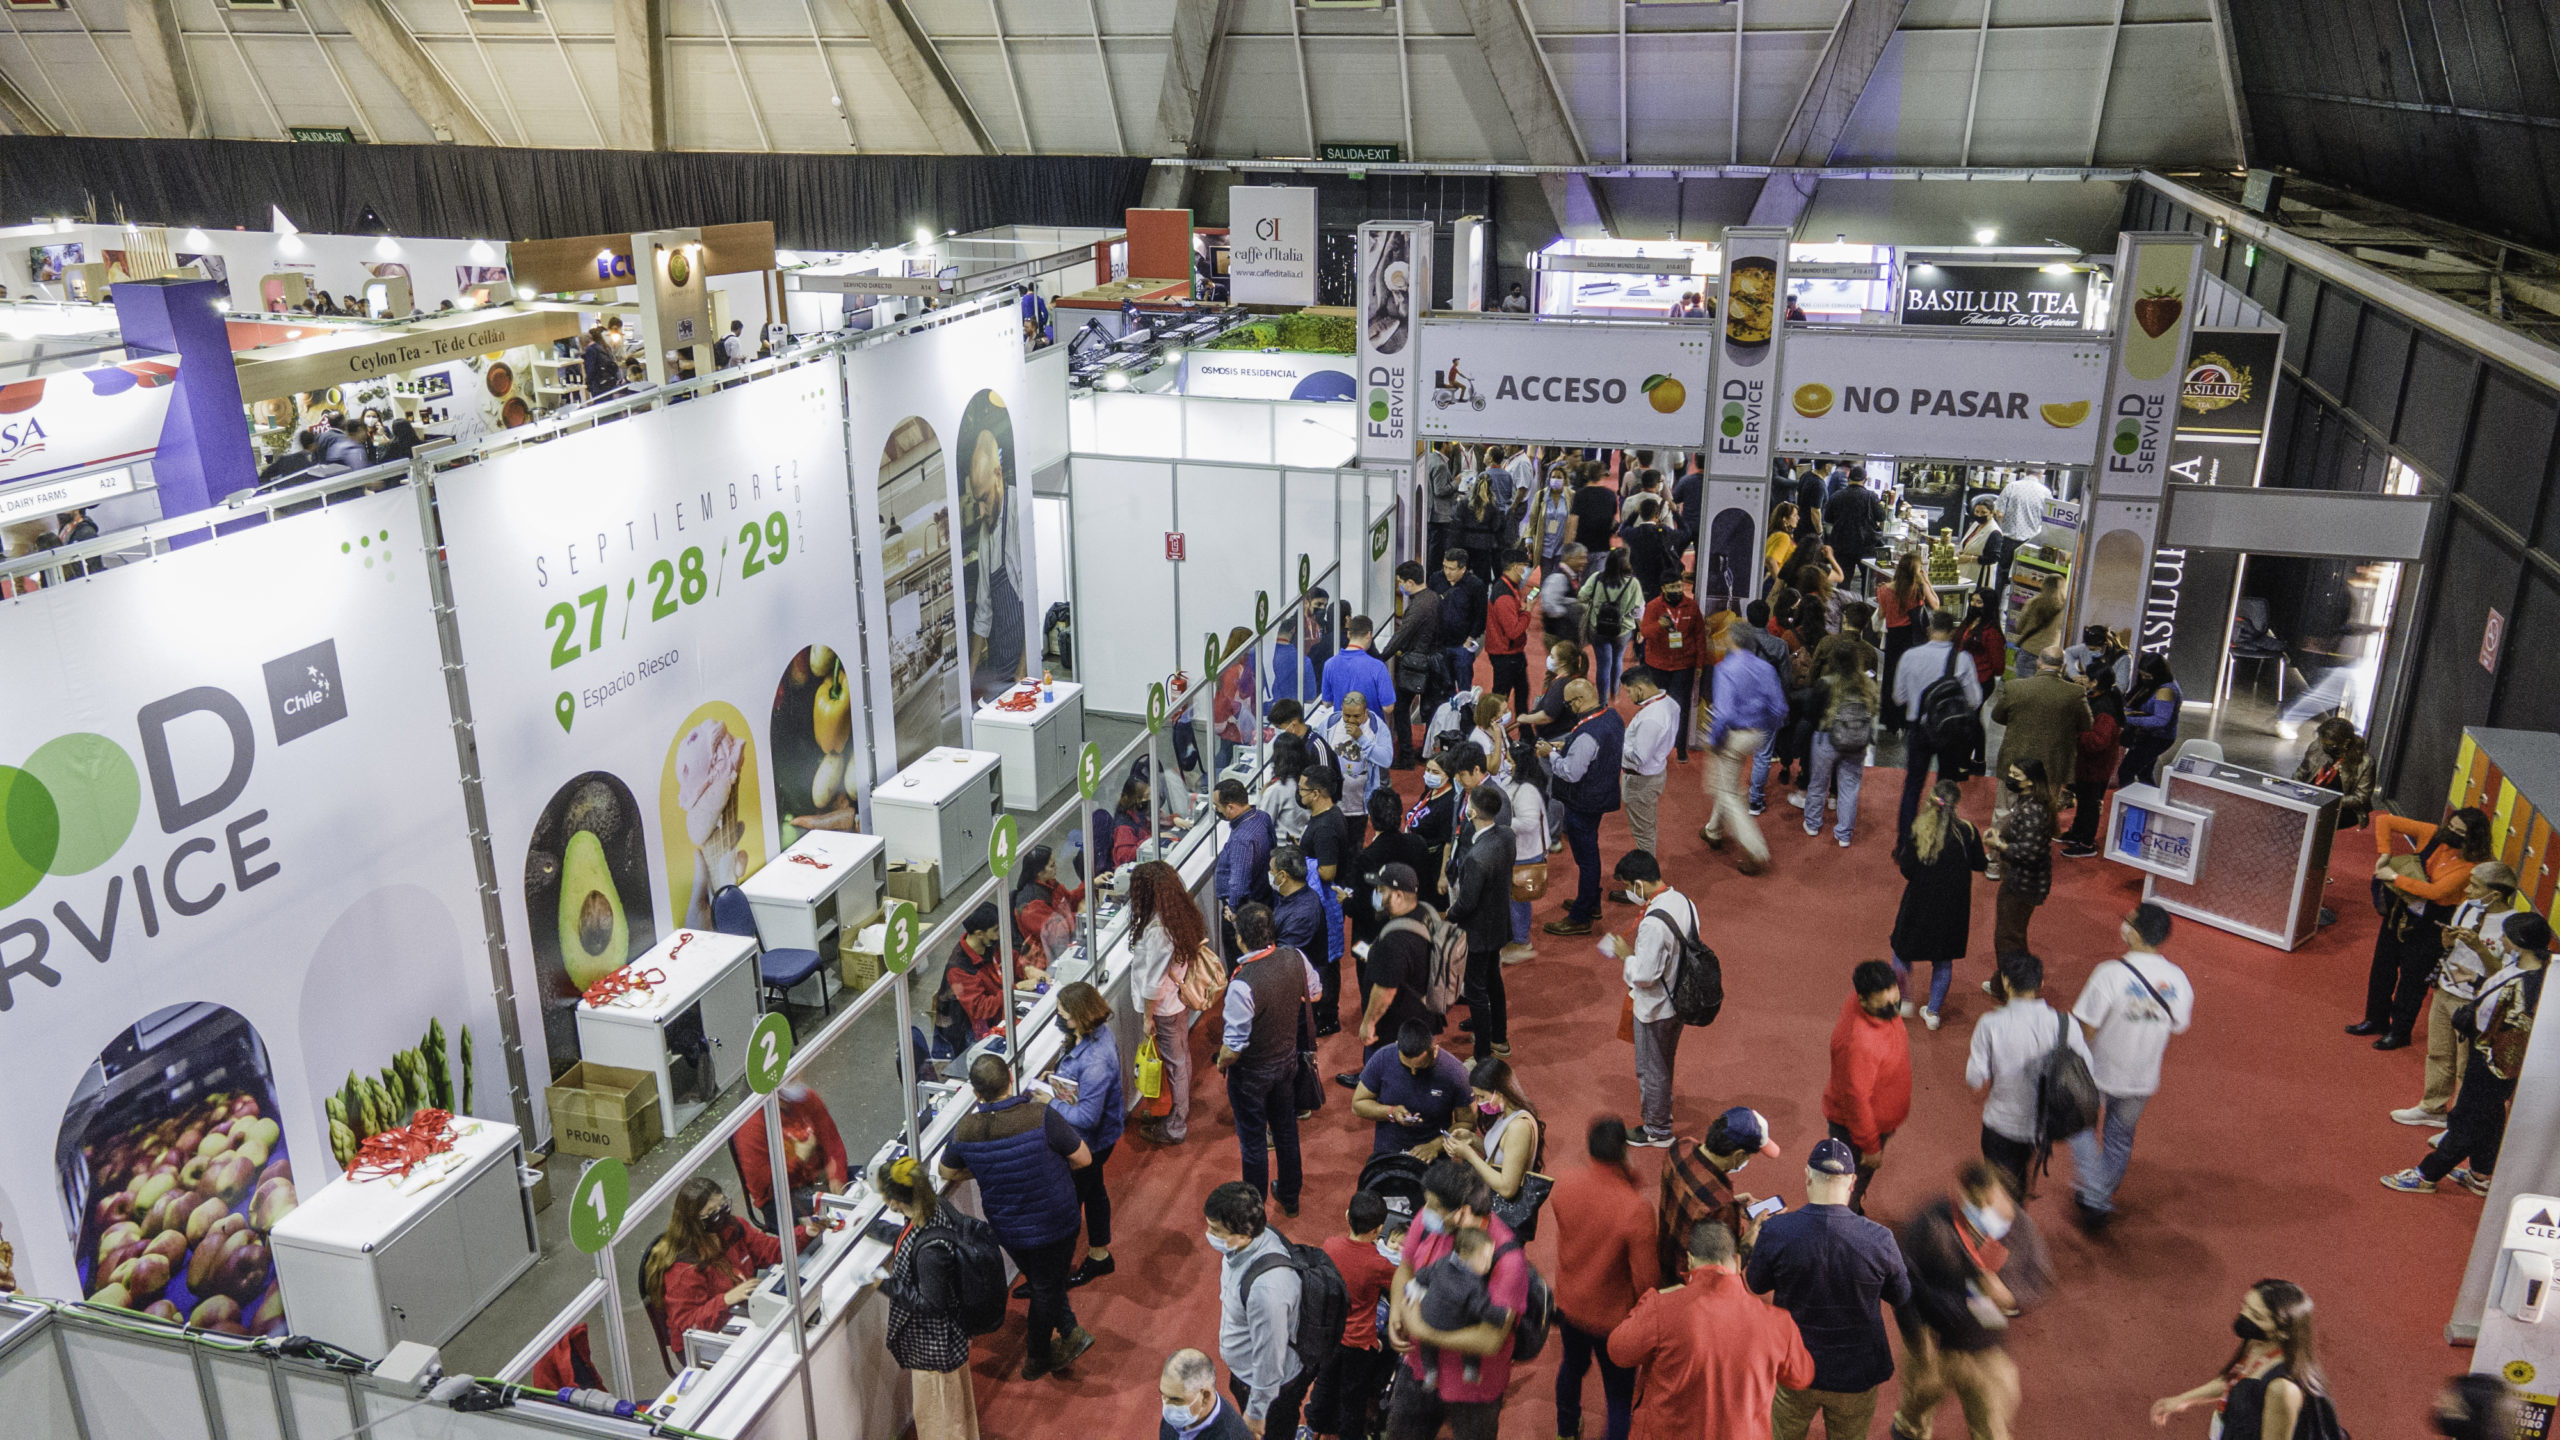 Espacio Food & Service 2023 scheduled for September in Chile